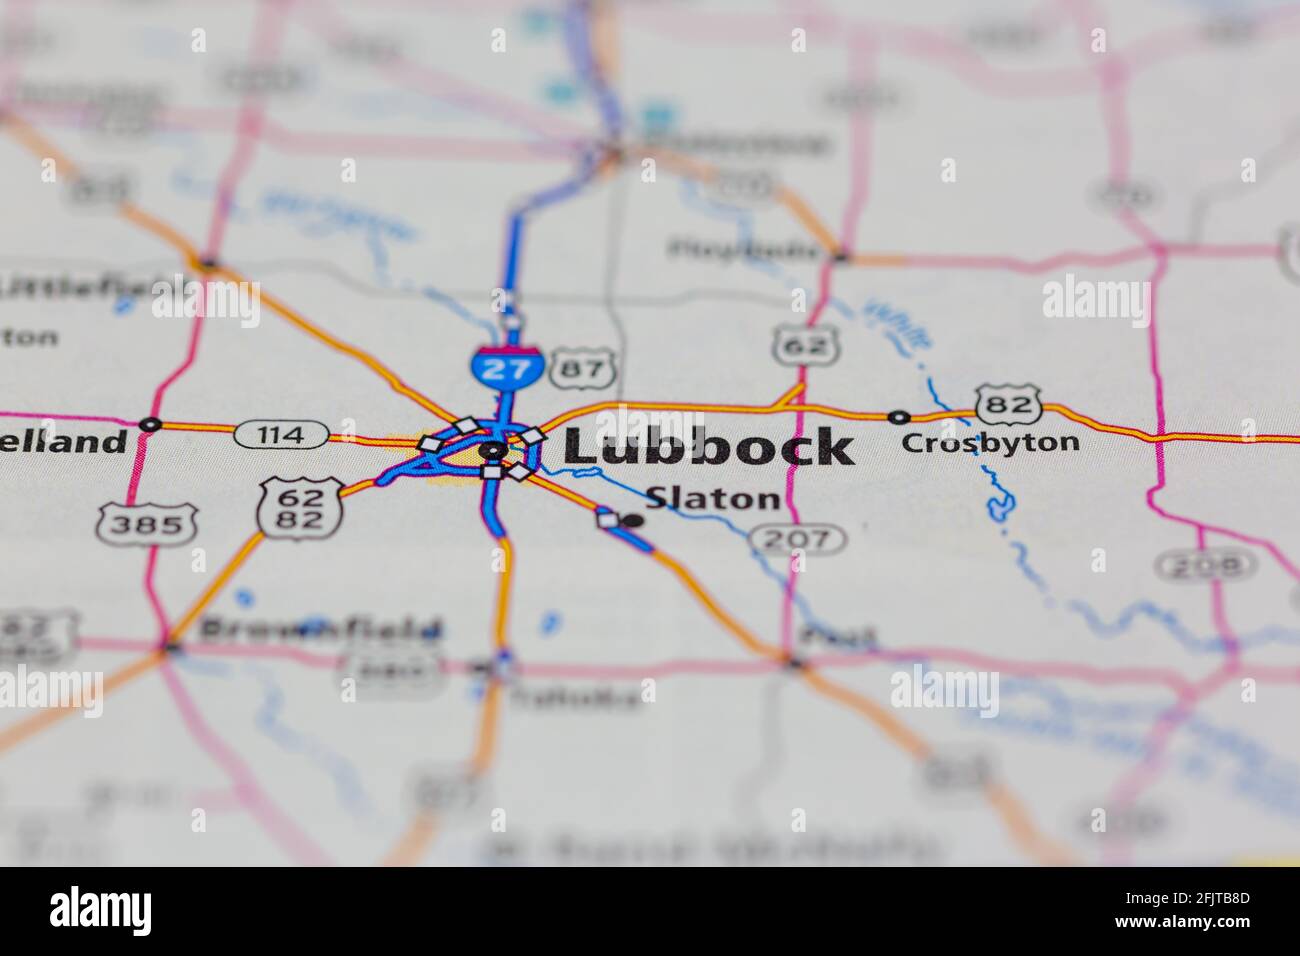 Lubbock Texas Usa And Surrounding Areas Shown On A Road Map Or